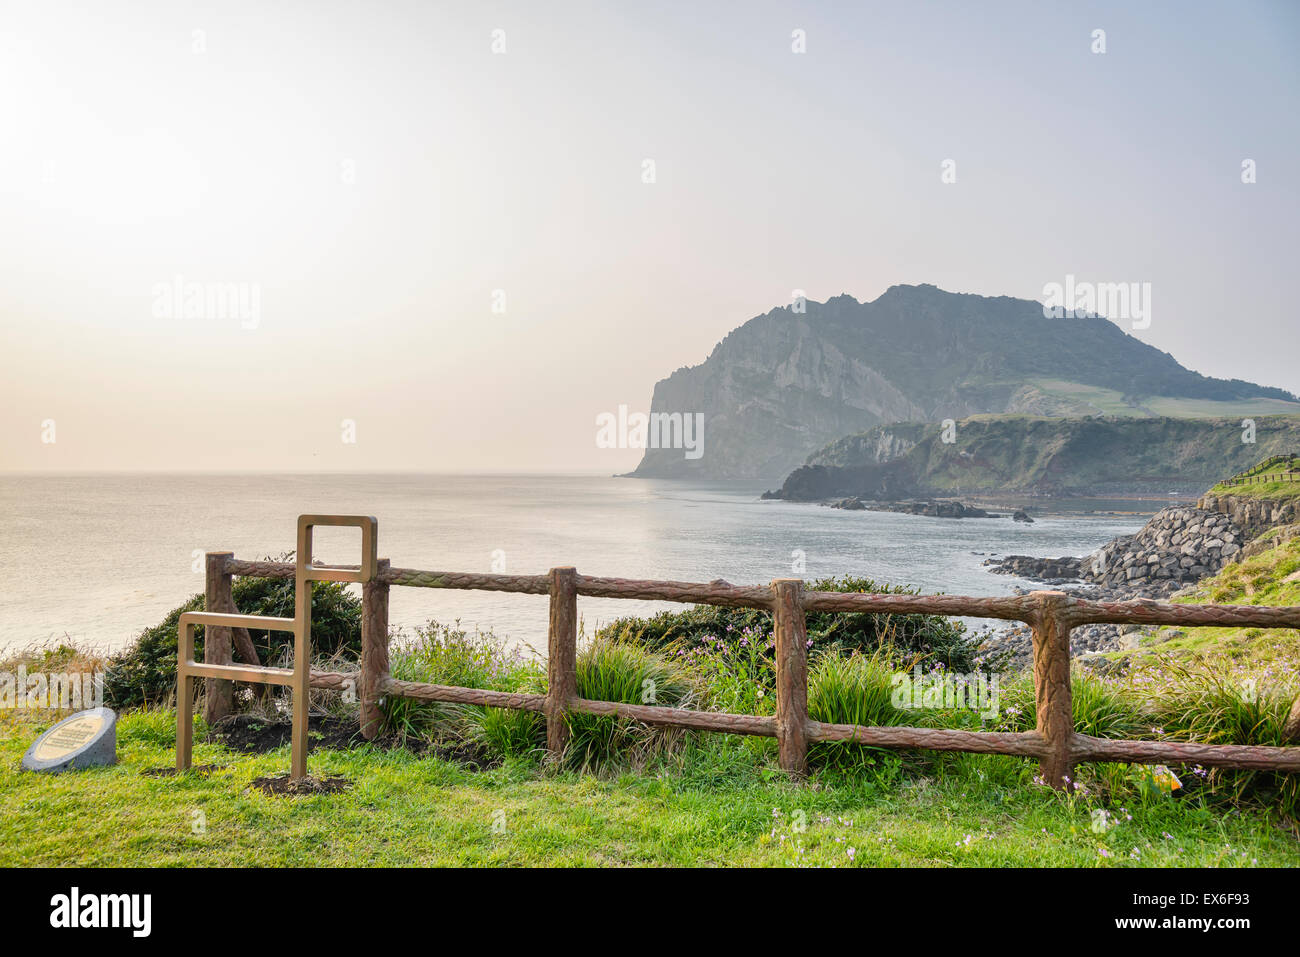 Landscape of Seongsan Ilchulbong with olle trail symbol in a morning. Stock Photo